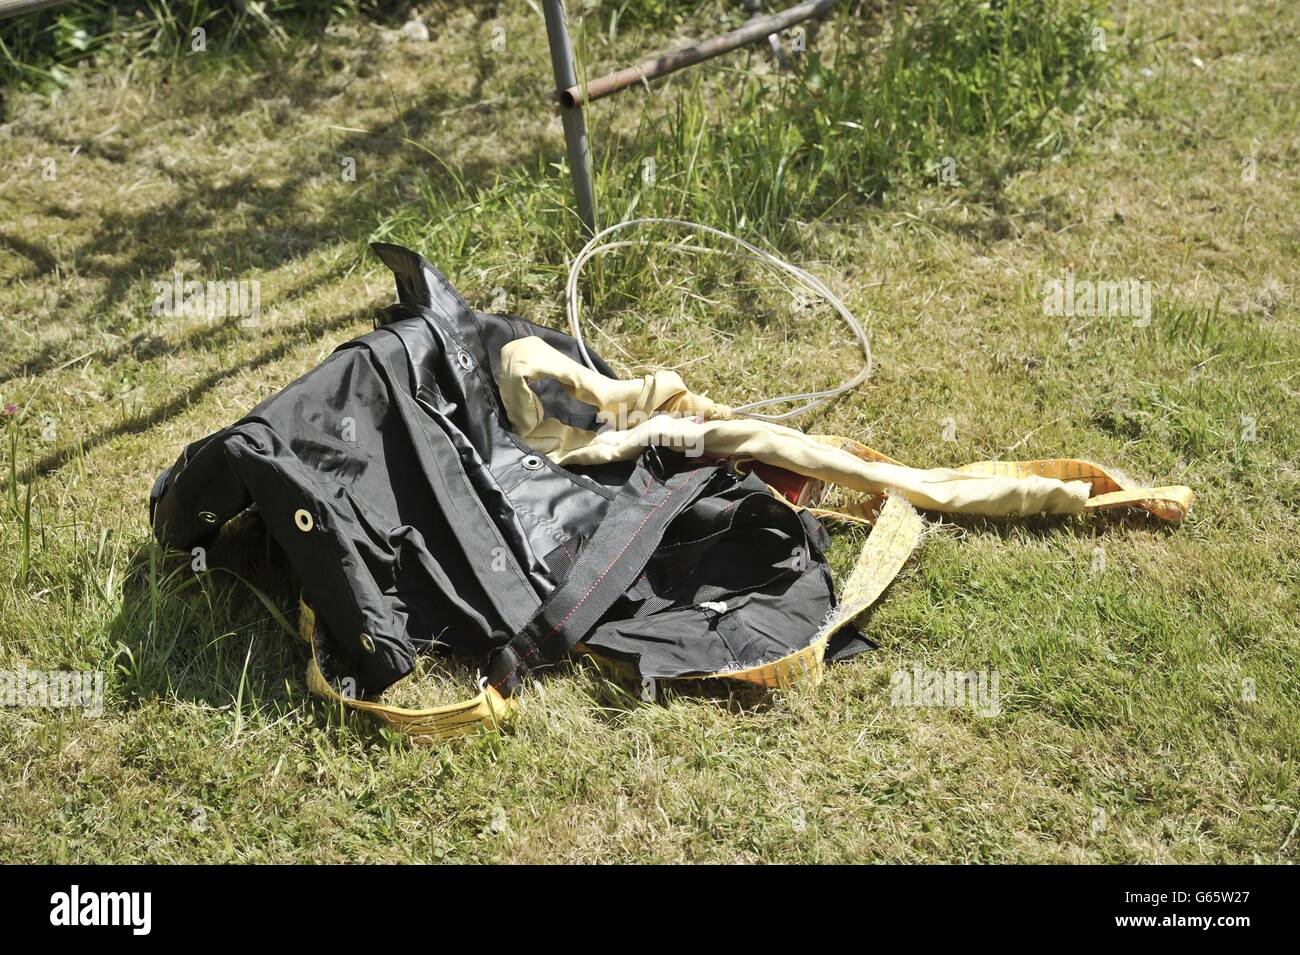 The drogue parachute after a Cirrus single-engine aircraft made a dramatic crash-landing in a back garden in Cheltenham, Gloucestershire. Stock Photo